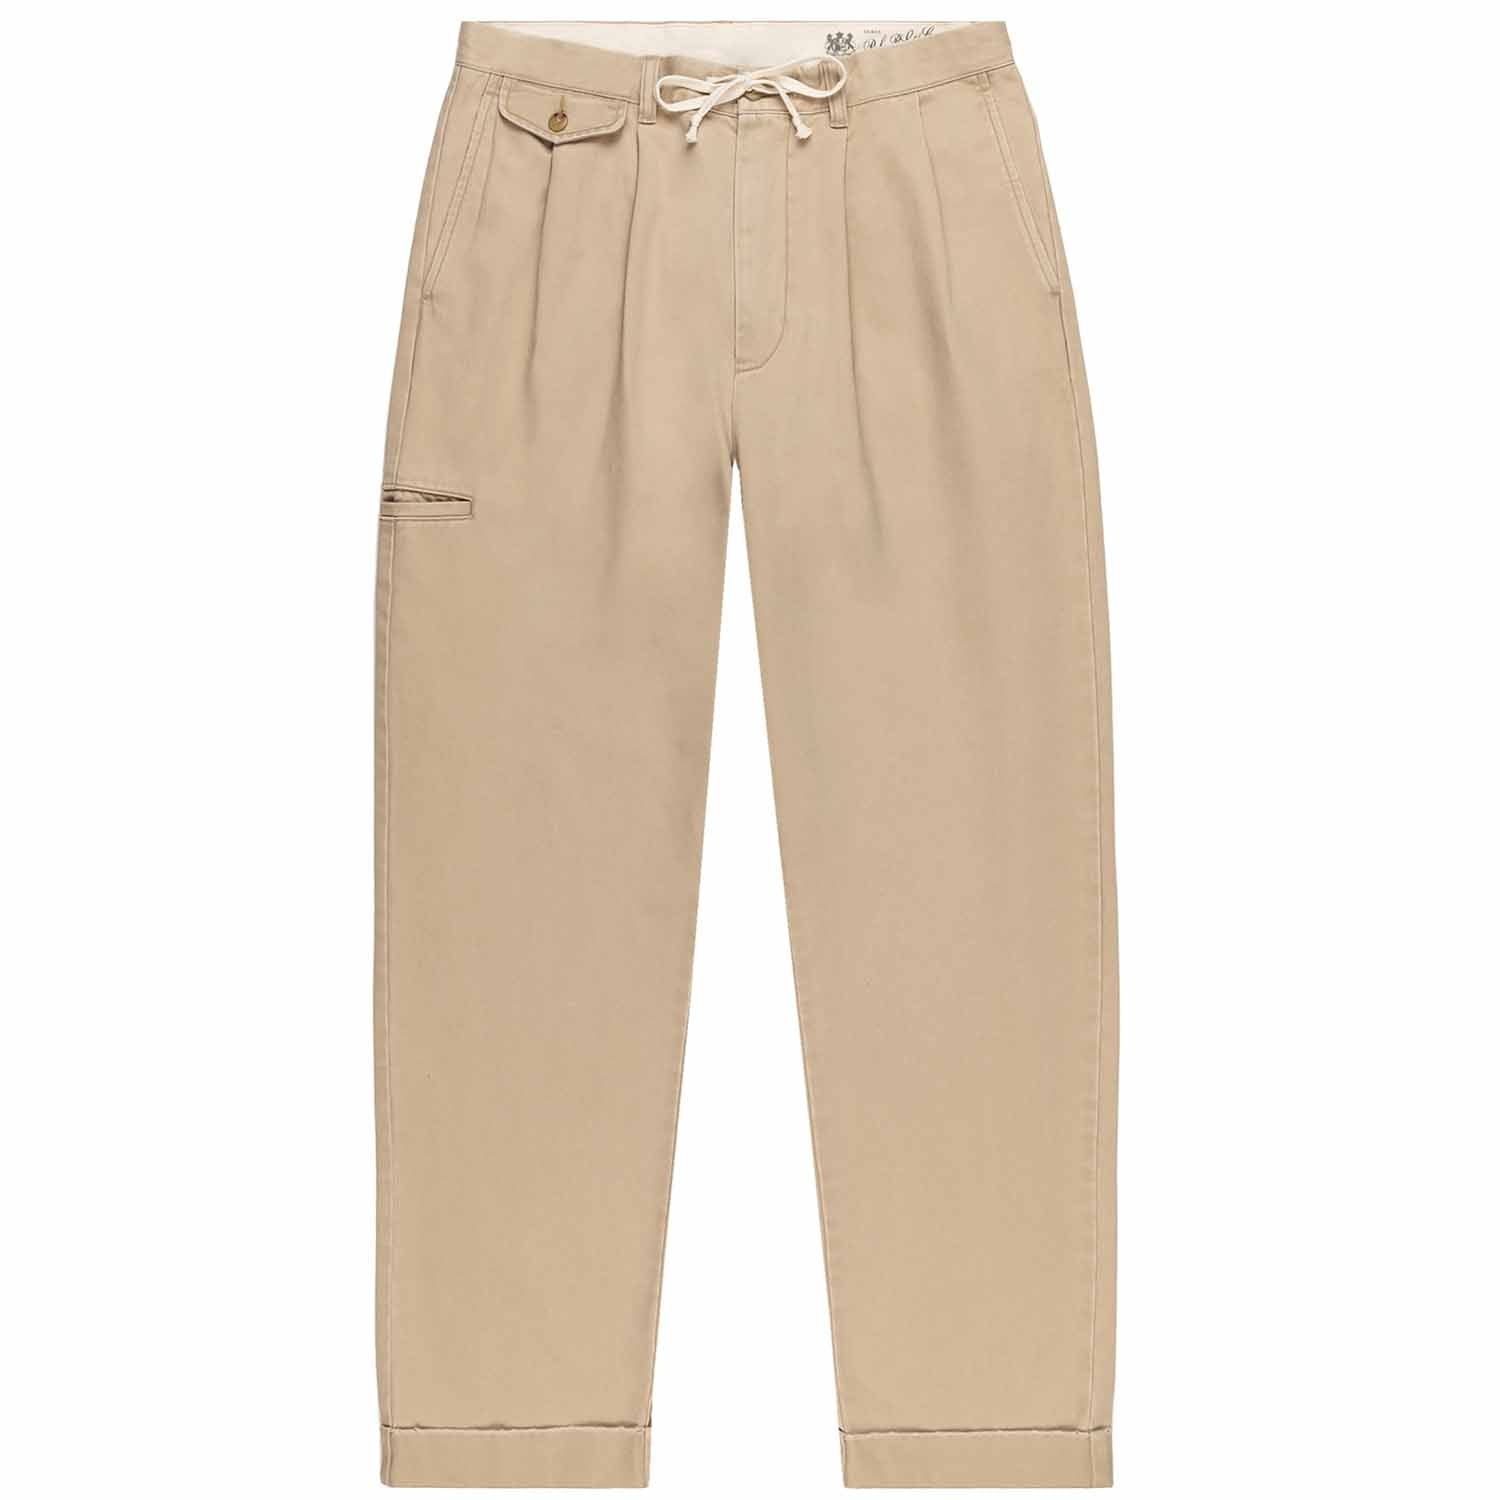 Polo Ralph Lauren x Element Whitman Chino in tan with added cream draw string. Small pocket on front right hip and small pocket on right middle leg.